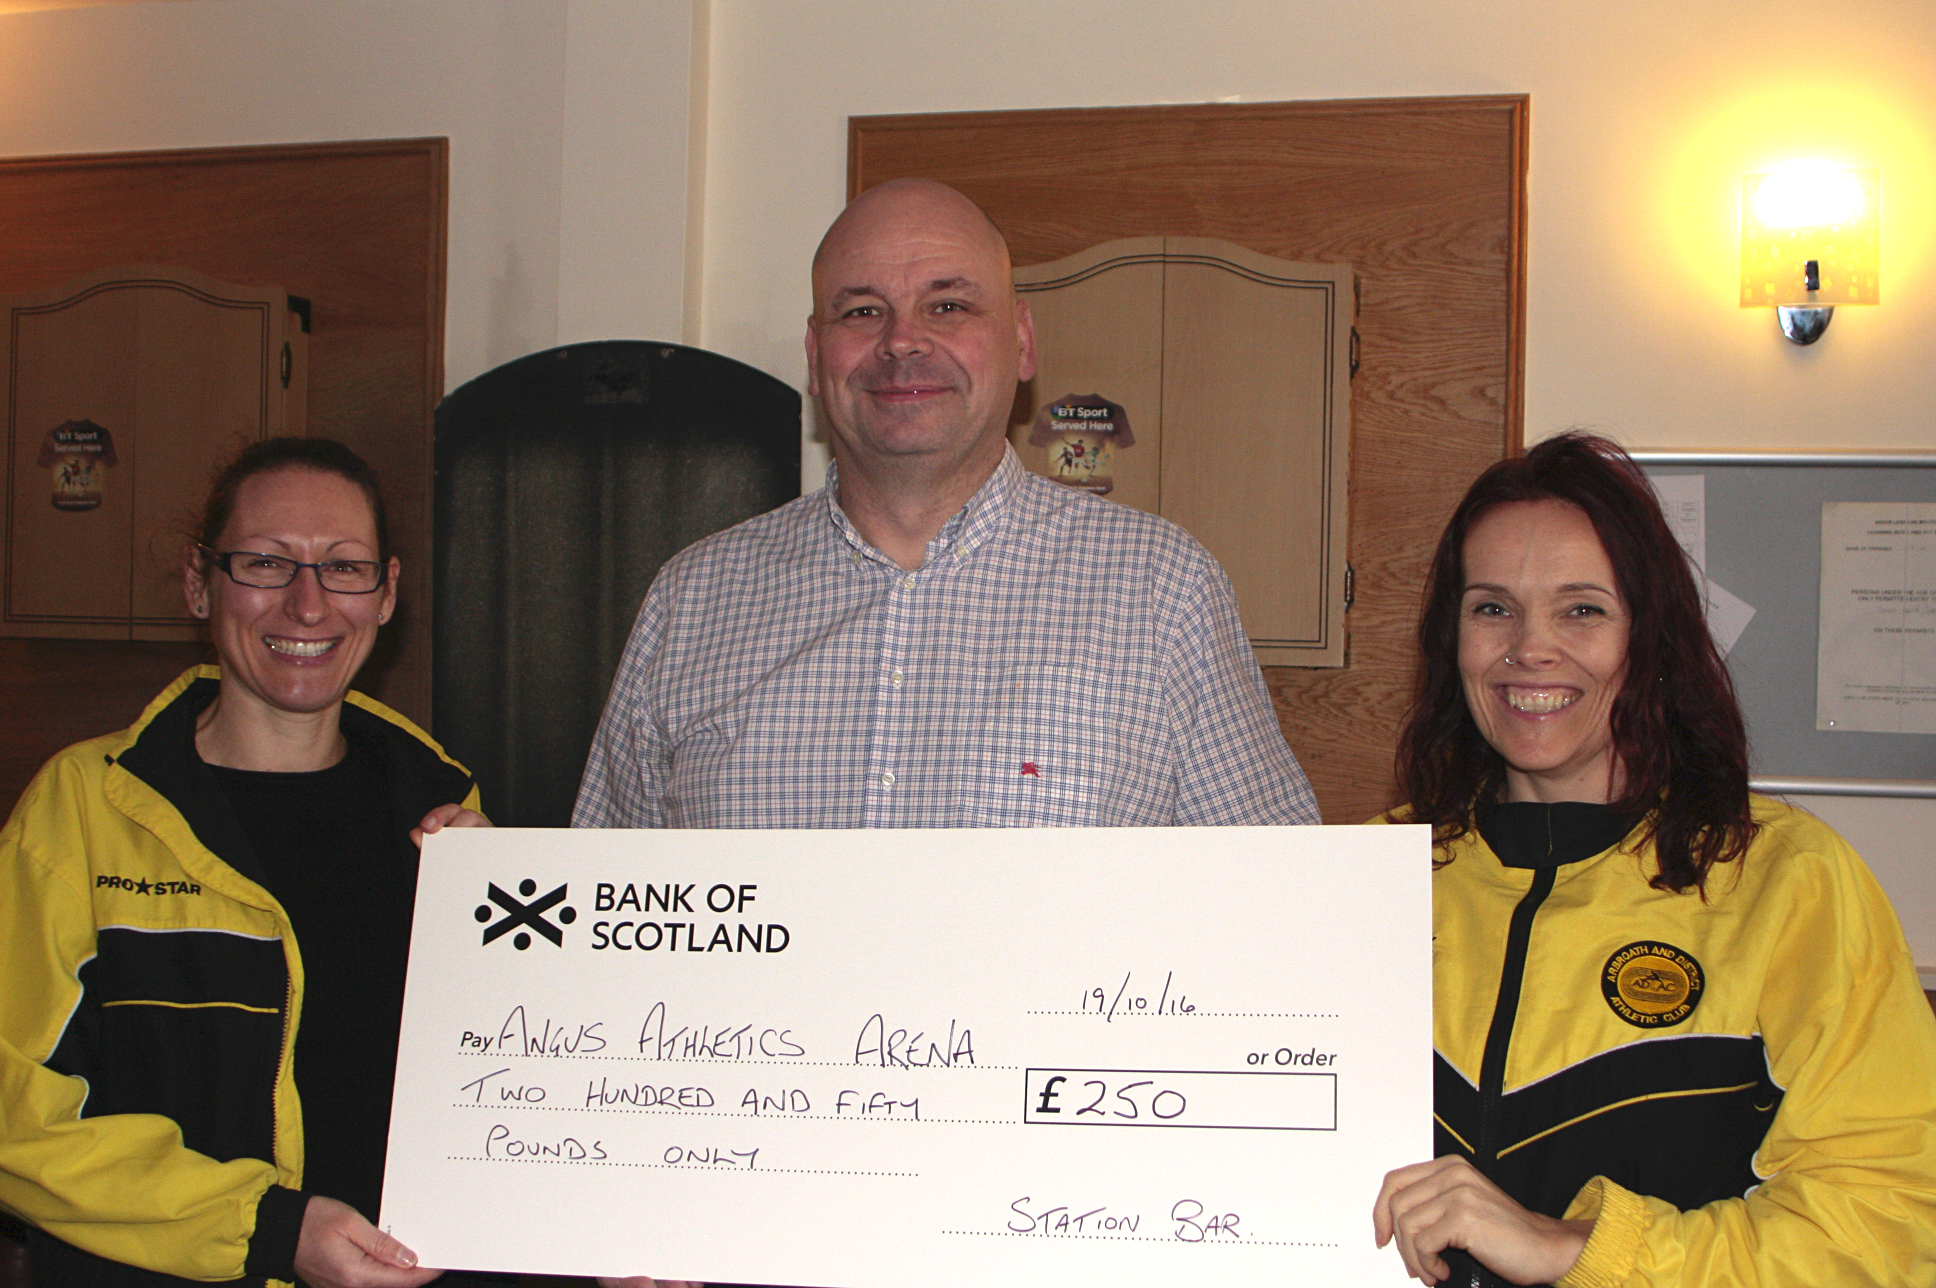 Angus Athletics Arena campaign vice chair Cherise Whamond (left) and treasurer Karen Kelly (right) receiving a donation to the campaign from Station Bar proprietor Paul Cook.